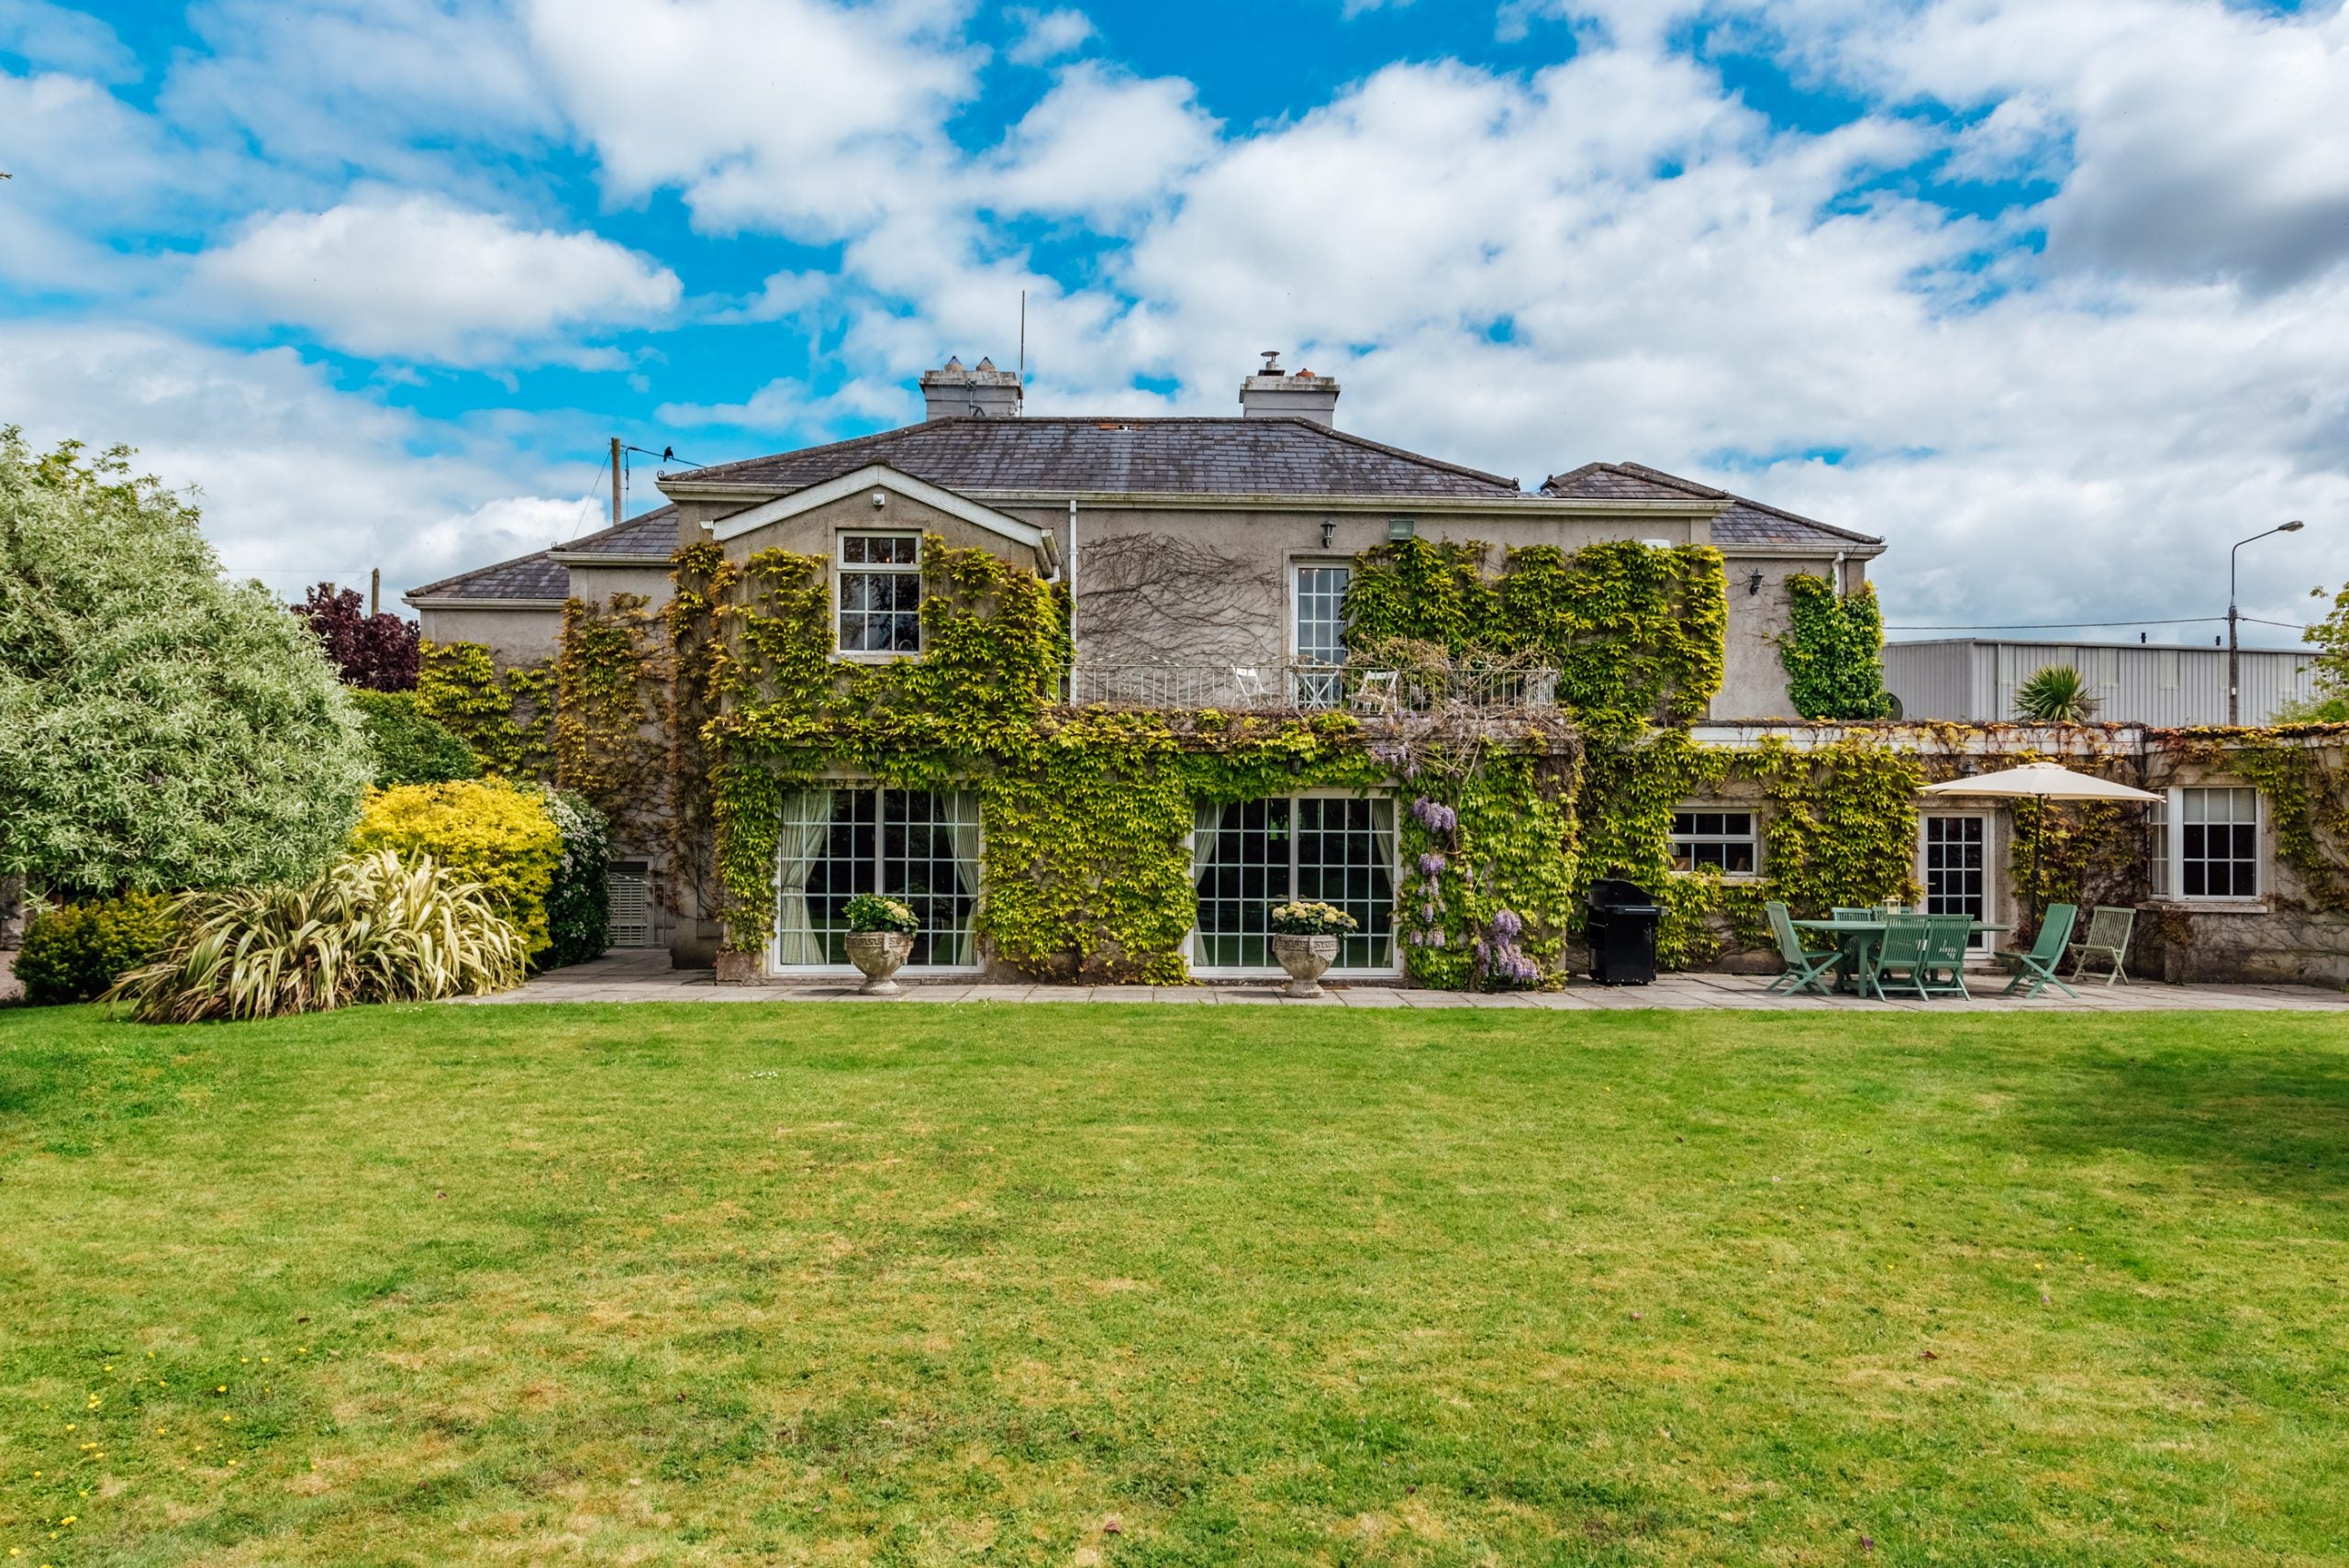 Discover the 'Venice of Ireland' from this Historic Home